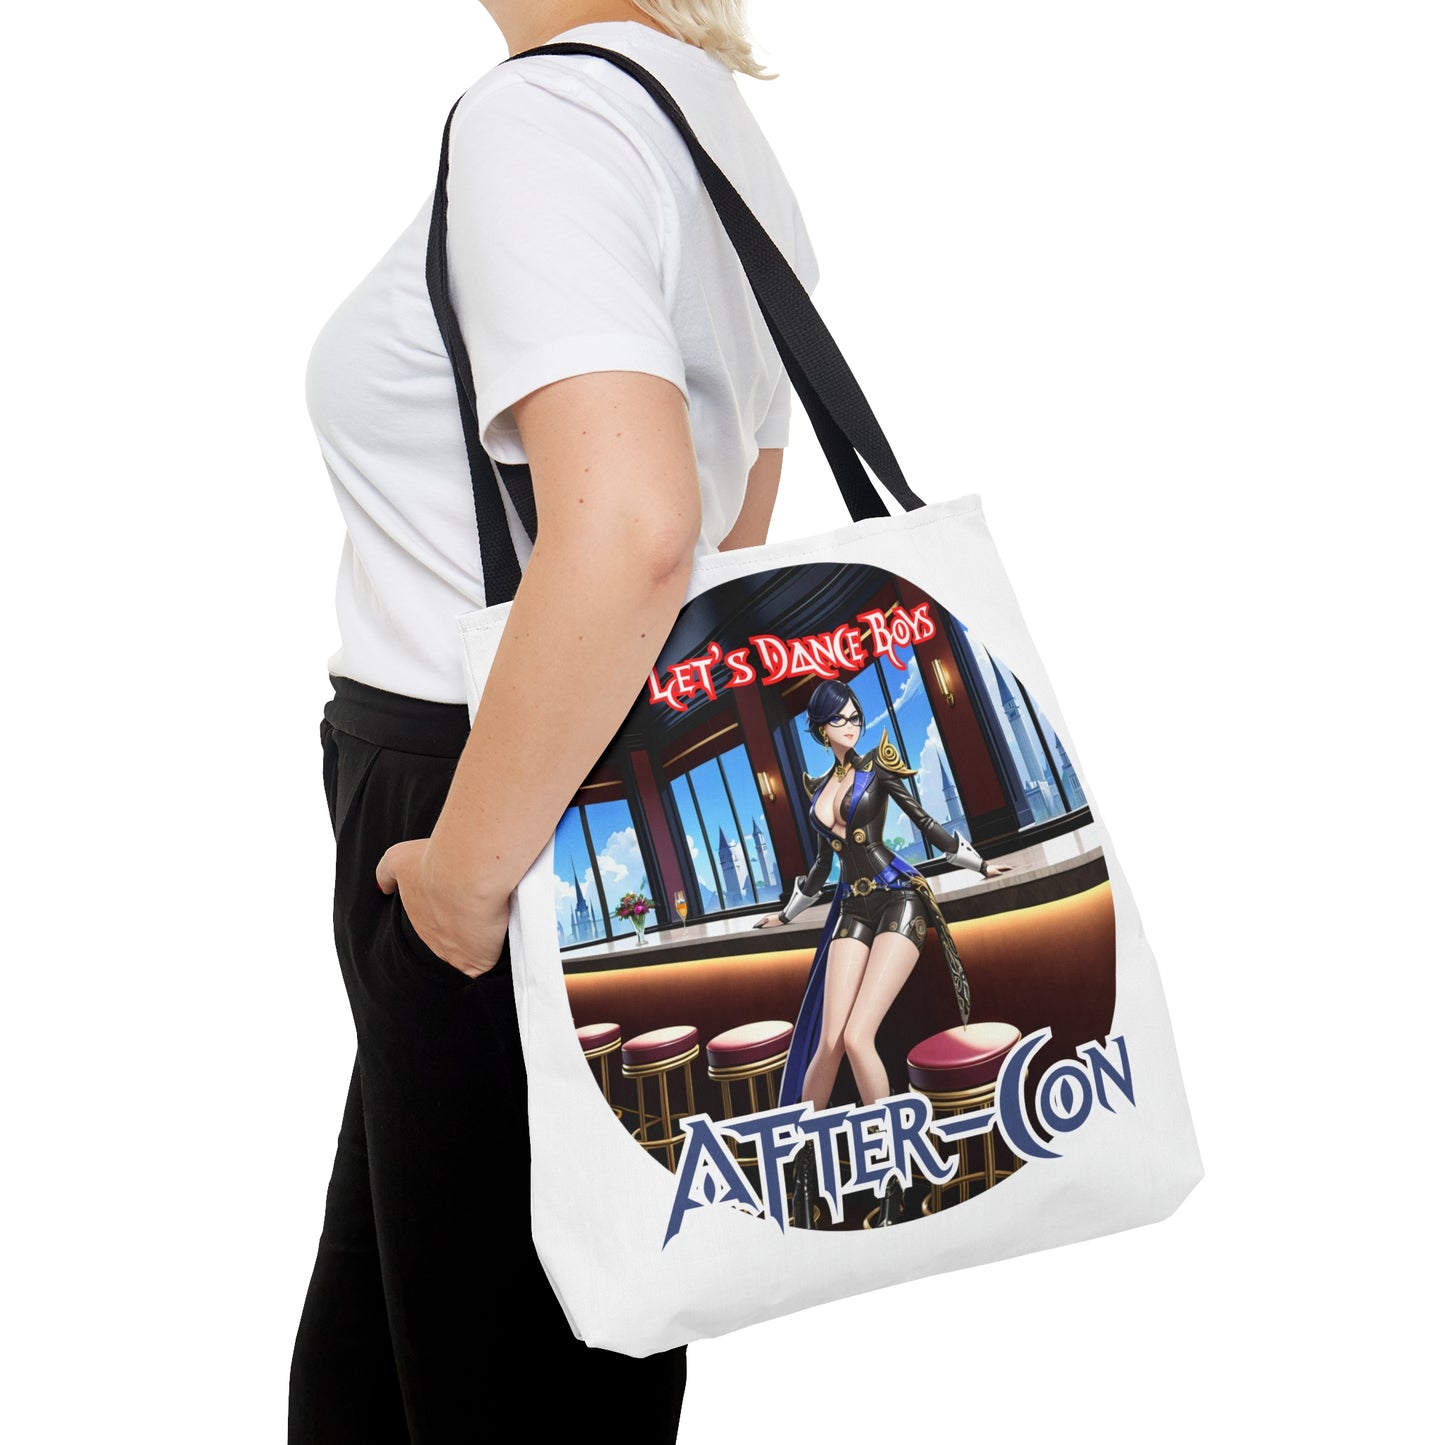 After-Con "Let's Dance Boys!" Tote Bag